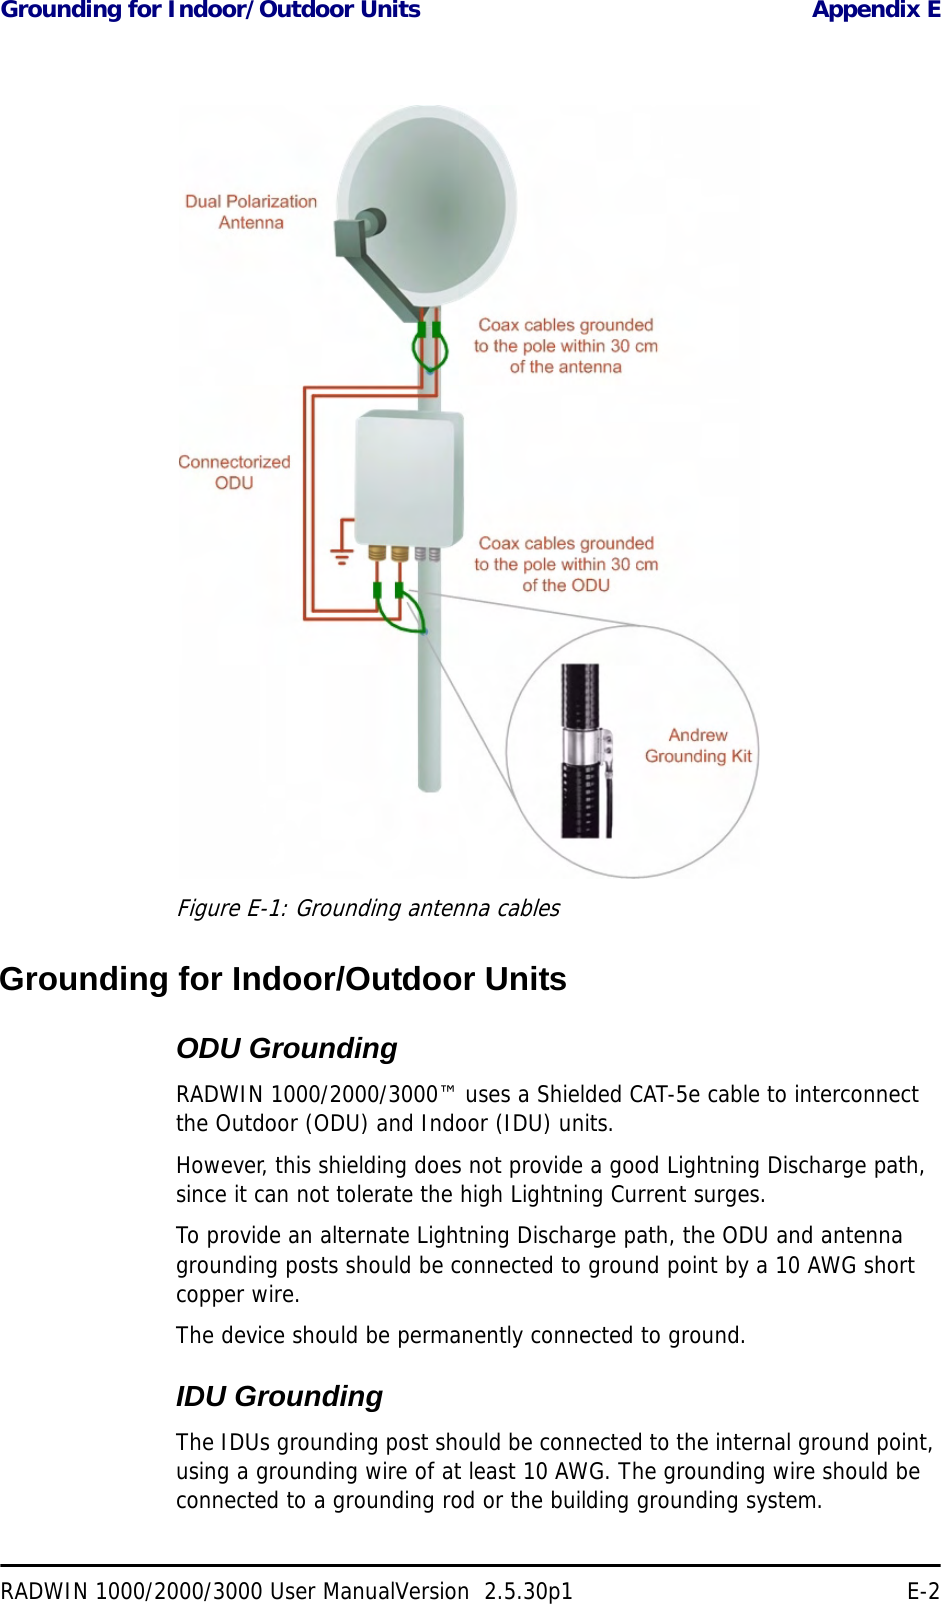 Grounding for Indoor/Outdoor Units Appendix ERADWIN 1000/2000/3000 User ManualVersion  2.5.30p1 E-2Figure E-1: Grounding antenna cablesGrounding for Indoor/Outdoor UnitsODU GroundingRADWIN 1000/2000/3000™ uses a Shielded CAT-5e cable to interconnect the Outdoor (ODU) and Indoor (IDU) units. However, this shielding does not provide a good Lightning Discharge path, since it can not tolerate the high Lightning Current surges.To provide an alternate Lightning Discharge path, the ODU and antenna grounding posts should be connected to ground point by a 10 AWG short copper wire.The device should be permanently connected to ground.IDU GroundingThe IDUs grounding post should be connected to the internal ground point, using a grounding wire of at least 10 AWG. The grounding wire should be connected to a grounding rod or the building grounding system.